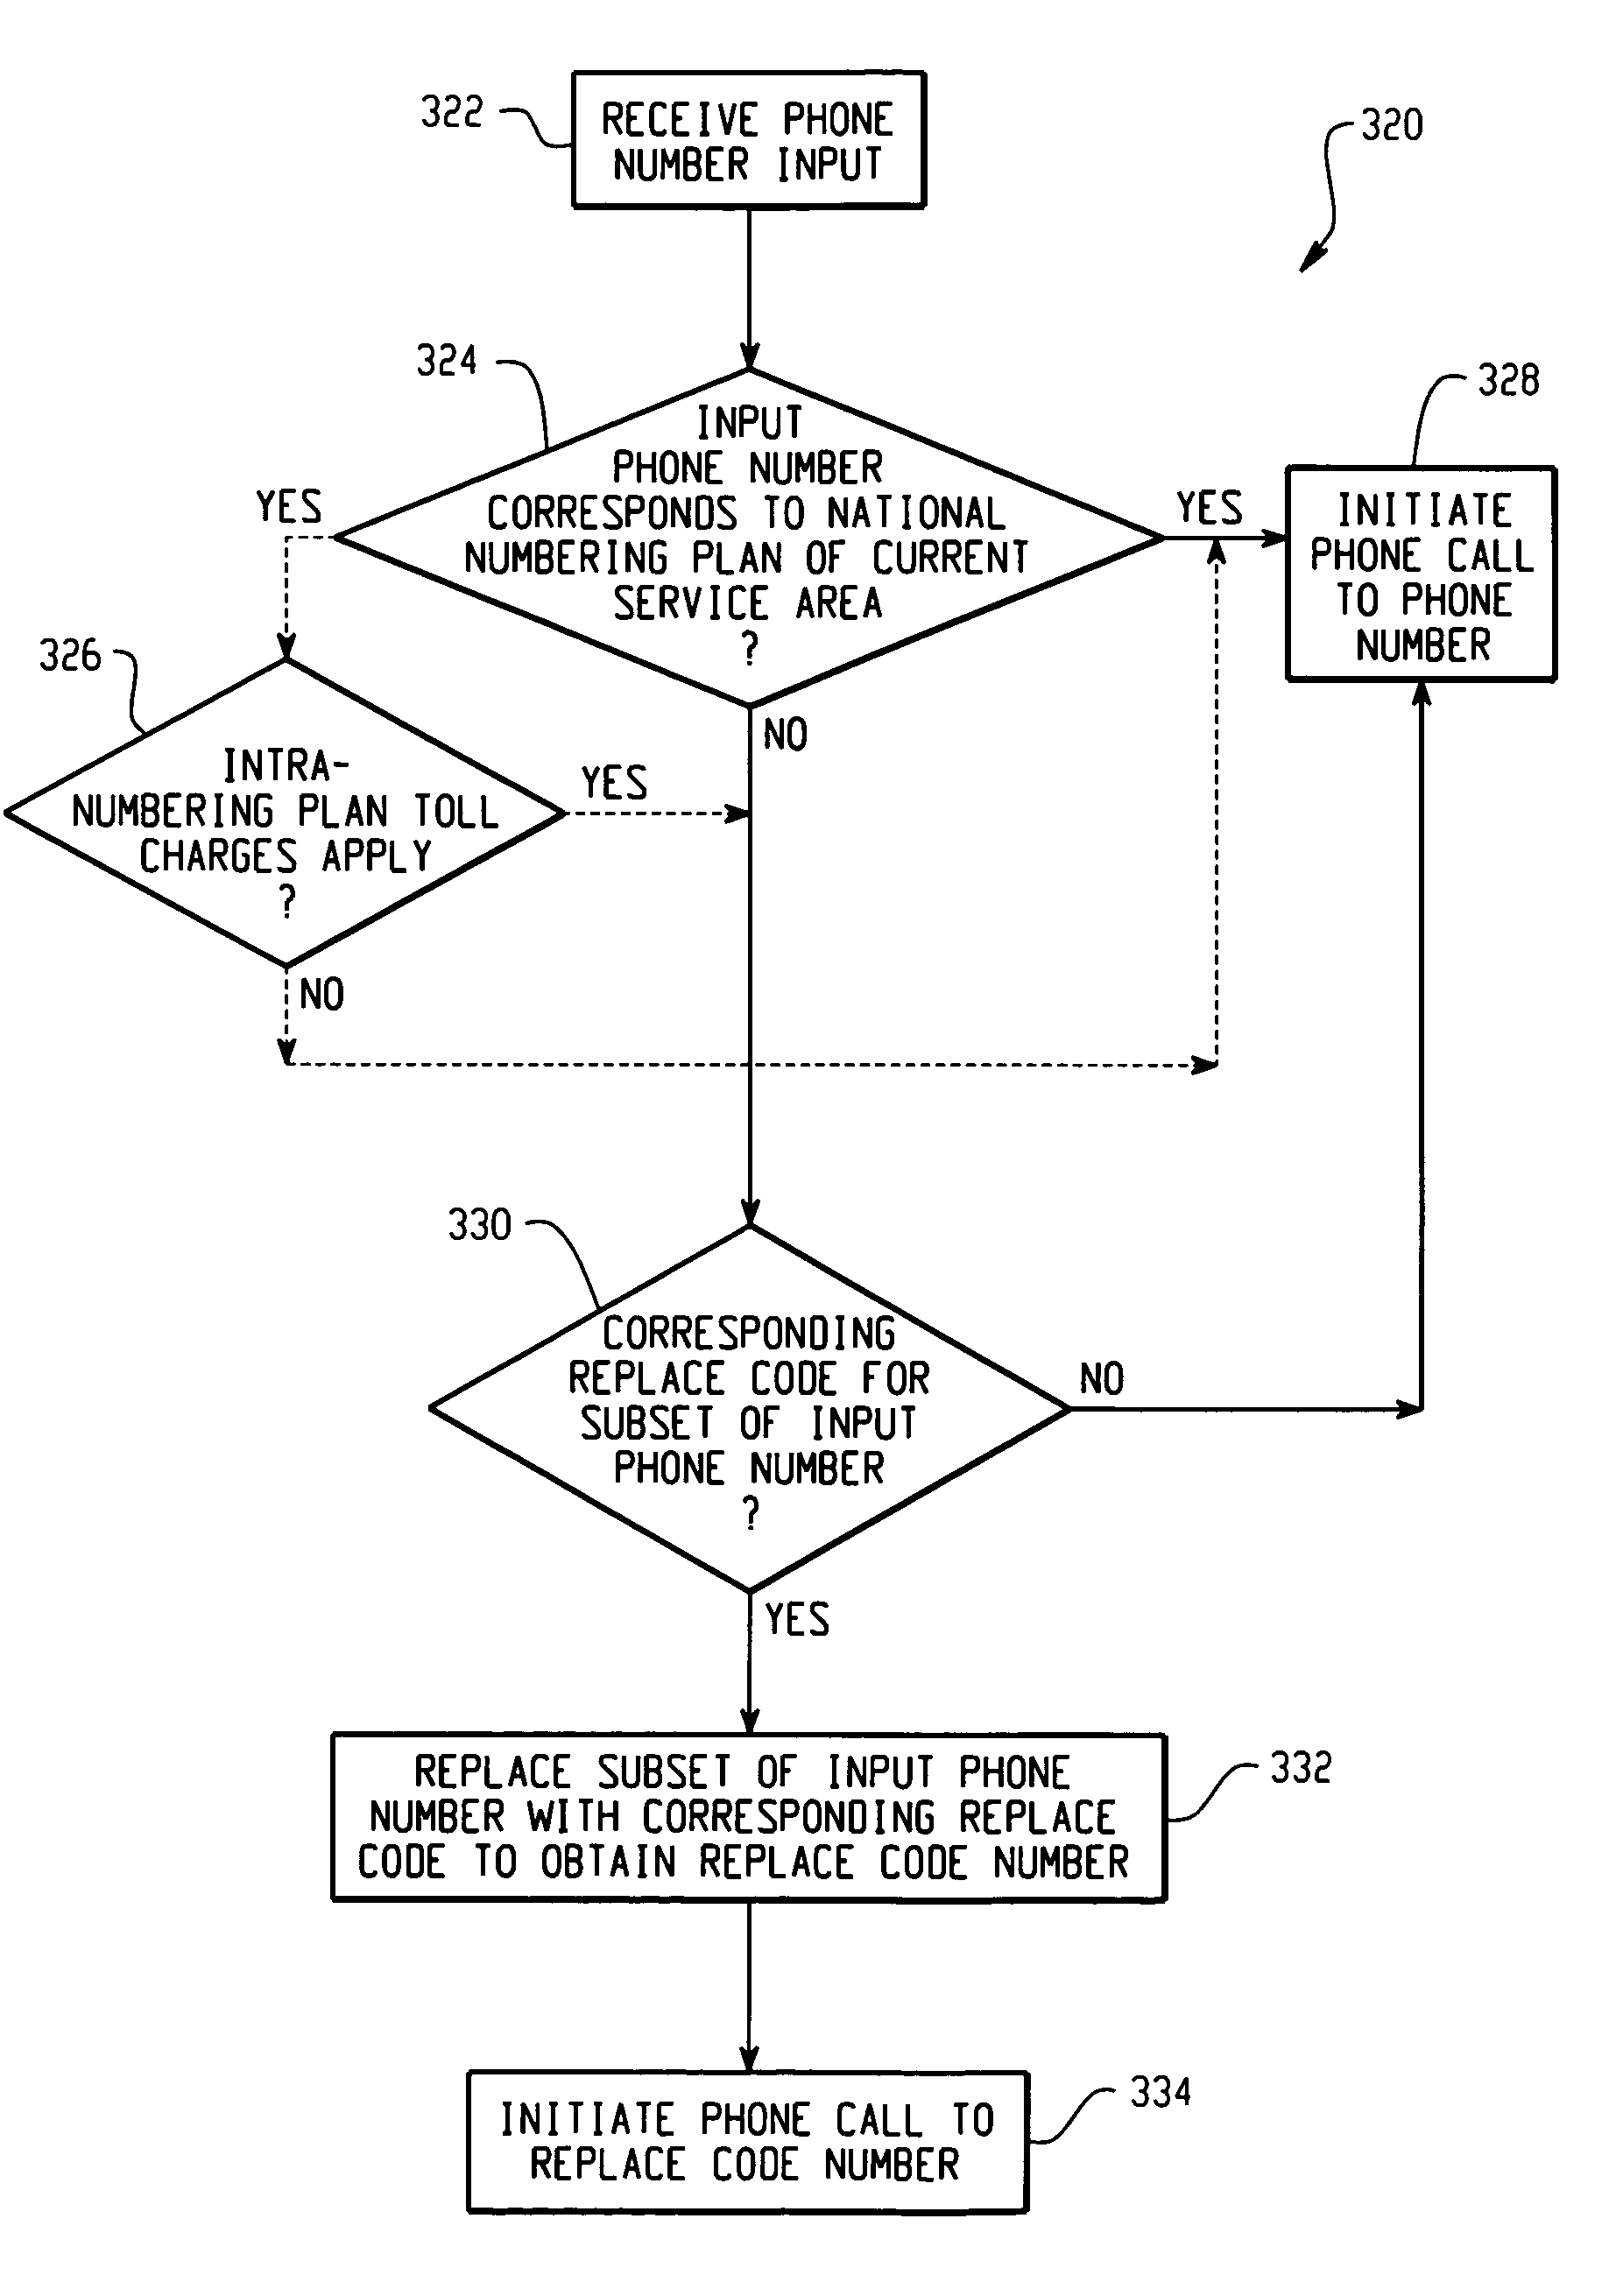 Phone number replace code system and method